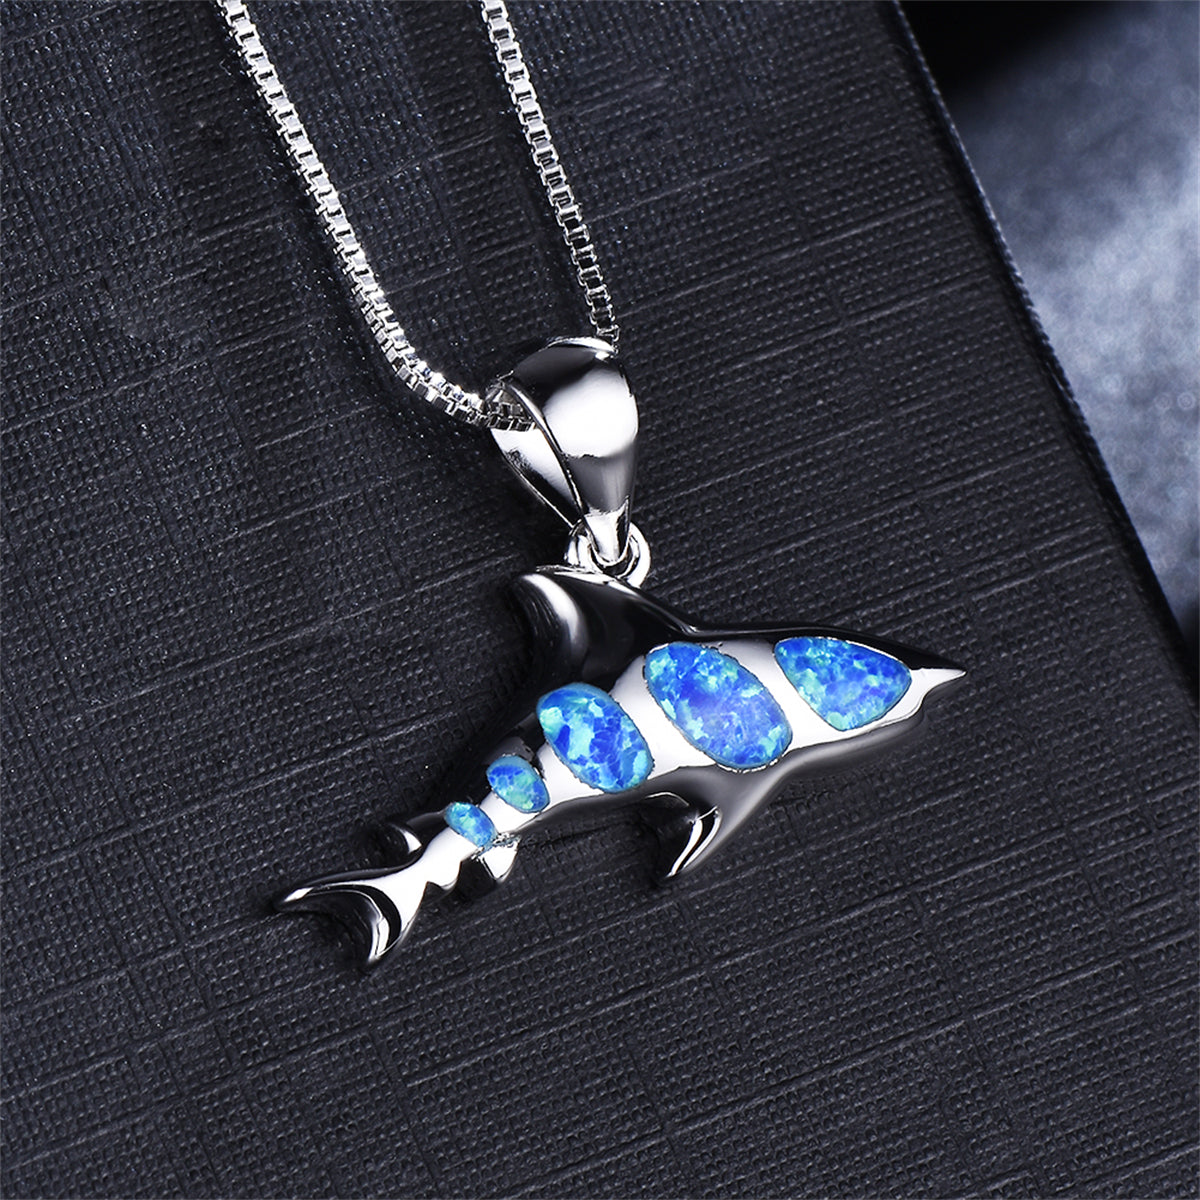 Blue Opal & Silver-Plated Shark Pendant Necklace